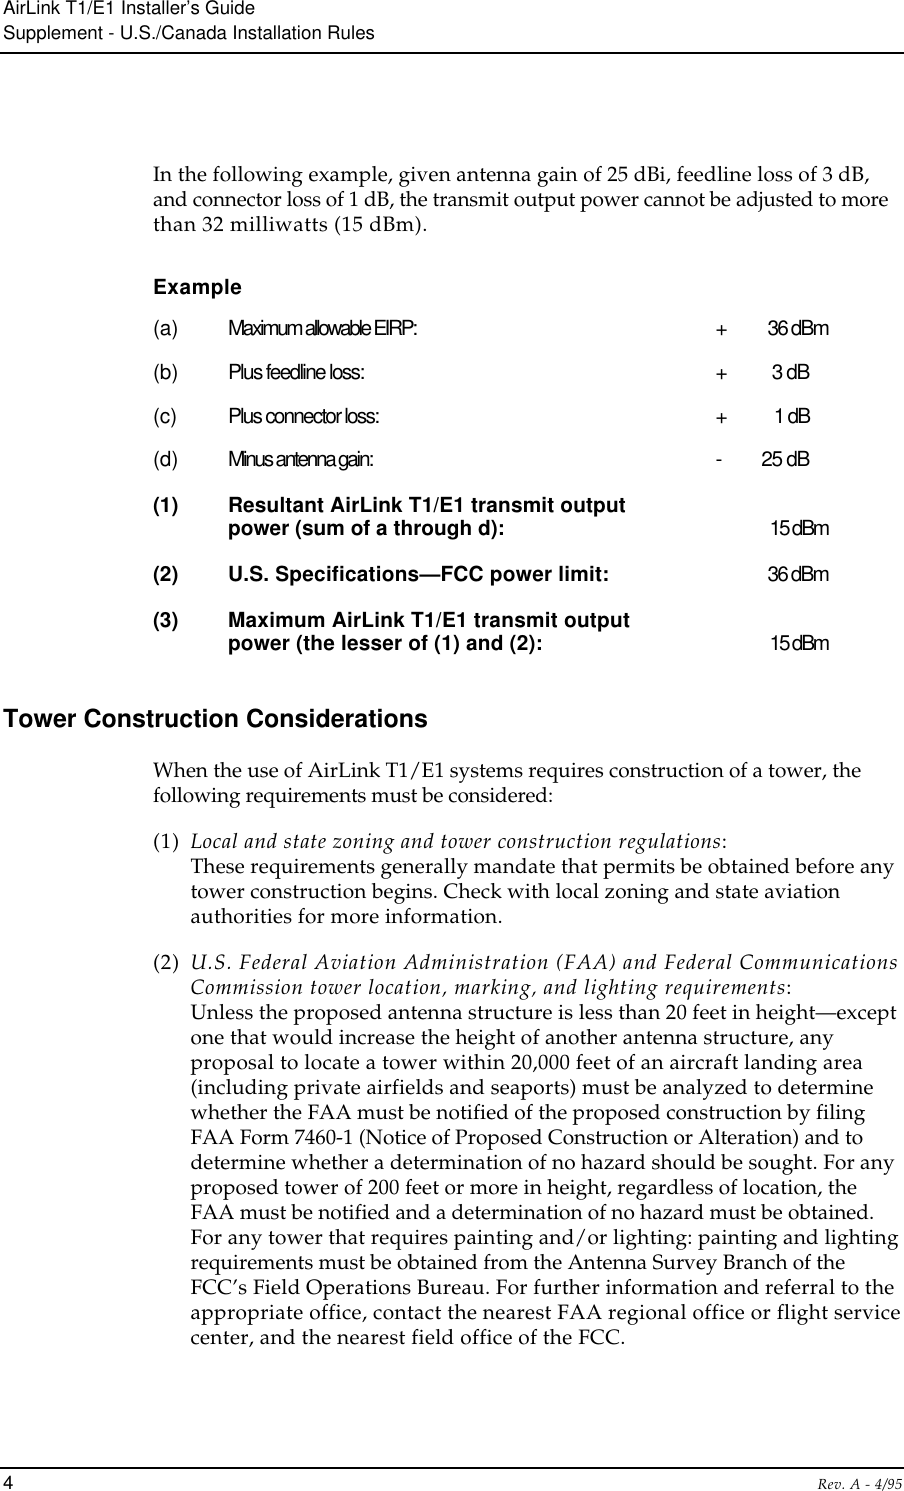 AirLink T1/E1 Installer’s GuideSupplement - U.S./Canada Installation Rules4Rev. A - 4/95In the following example, given antenna gain of 25 dBi, feedline loss of 3 dB,and connector loss of 1 dB, the transmit output power cannot be adjusted to morethan 32 milliwatts (15 dBm).Example(a) Maximum allowable EIRP: +  36 dBm(b) Plus feedline loss: +  3 dB(c) Plus connector loss: +  1 dB(d) Minus antenna gain: -  25 dB(1) Resultant AirLink T1/E1 transmit outputpower (sum of a through d): 15 dBm(2) U.S. Specifications—FCC power limit: 36 dBm(3) Maximum AirLink T1/E1 transmit outputpower (the lesser of (1) and (2): 15 dBmTower Construction ConsiderationsWhen the use of AirLink T1/E1 systems requires construction of a tower, thefollowing requirements must be considered:(1) Local and state zoning and tower construction regulations:These requirements generally mandate that permits be obtained before anytower construction begins. Check with local zoning and state aviationauthorities for more information.(2) U.S. Federal Aviation Administration (FAA) and Federal CommunicationsCommission tower location, marking, and lighting requirements:Unless the proposed antenna structure is less than 20 feet in height—exceptone that would increase the height of another antenna structure, anyproposal to locate a tower within 20,000 feet of an aircraft landing area(including private airfields and seaports) must be analyzed to determinewhether the FAA must be notified of the proposed construction by filingFAA Form 7460-1 (Notice of Proposed Construction or Alteration) and todetermine whether a determination of no hazard should be sought. For anyproposed tower of 200 feet or more in height, regardless of location, theFAA must be notified and a determination of no hazard must be obtained.For any tower that requires painting and/or lighting: painting and lightingrequirements must be obtained from the Antenna Survey Branch of theFCC’s Field Operations Bureau. For further information and referral to theappropriate office, contact the nearest FAA regional office or flight servicecenter, and the nearest field office of the FCC.